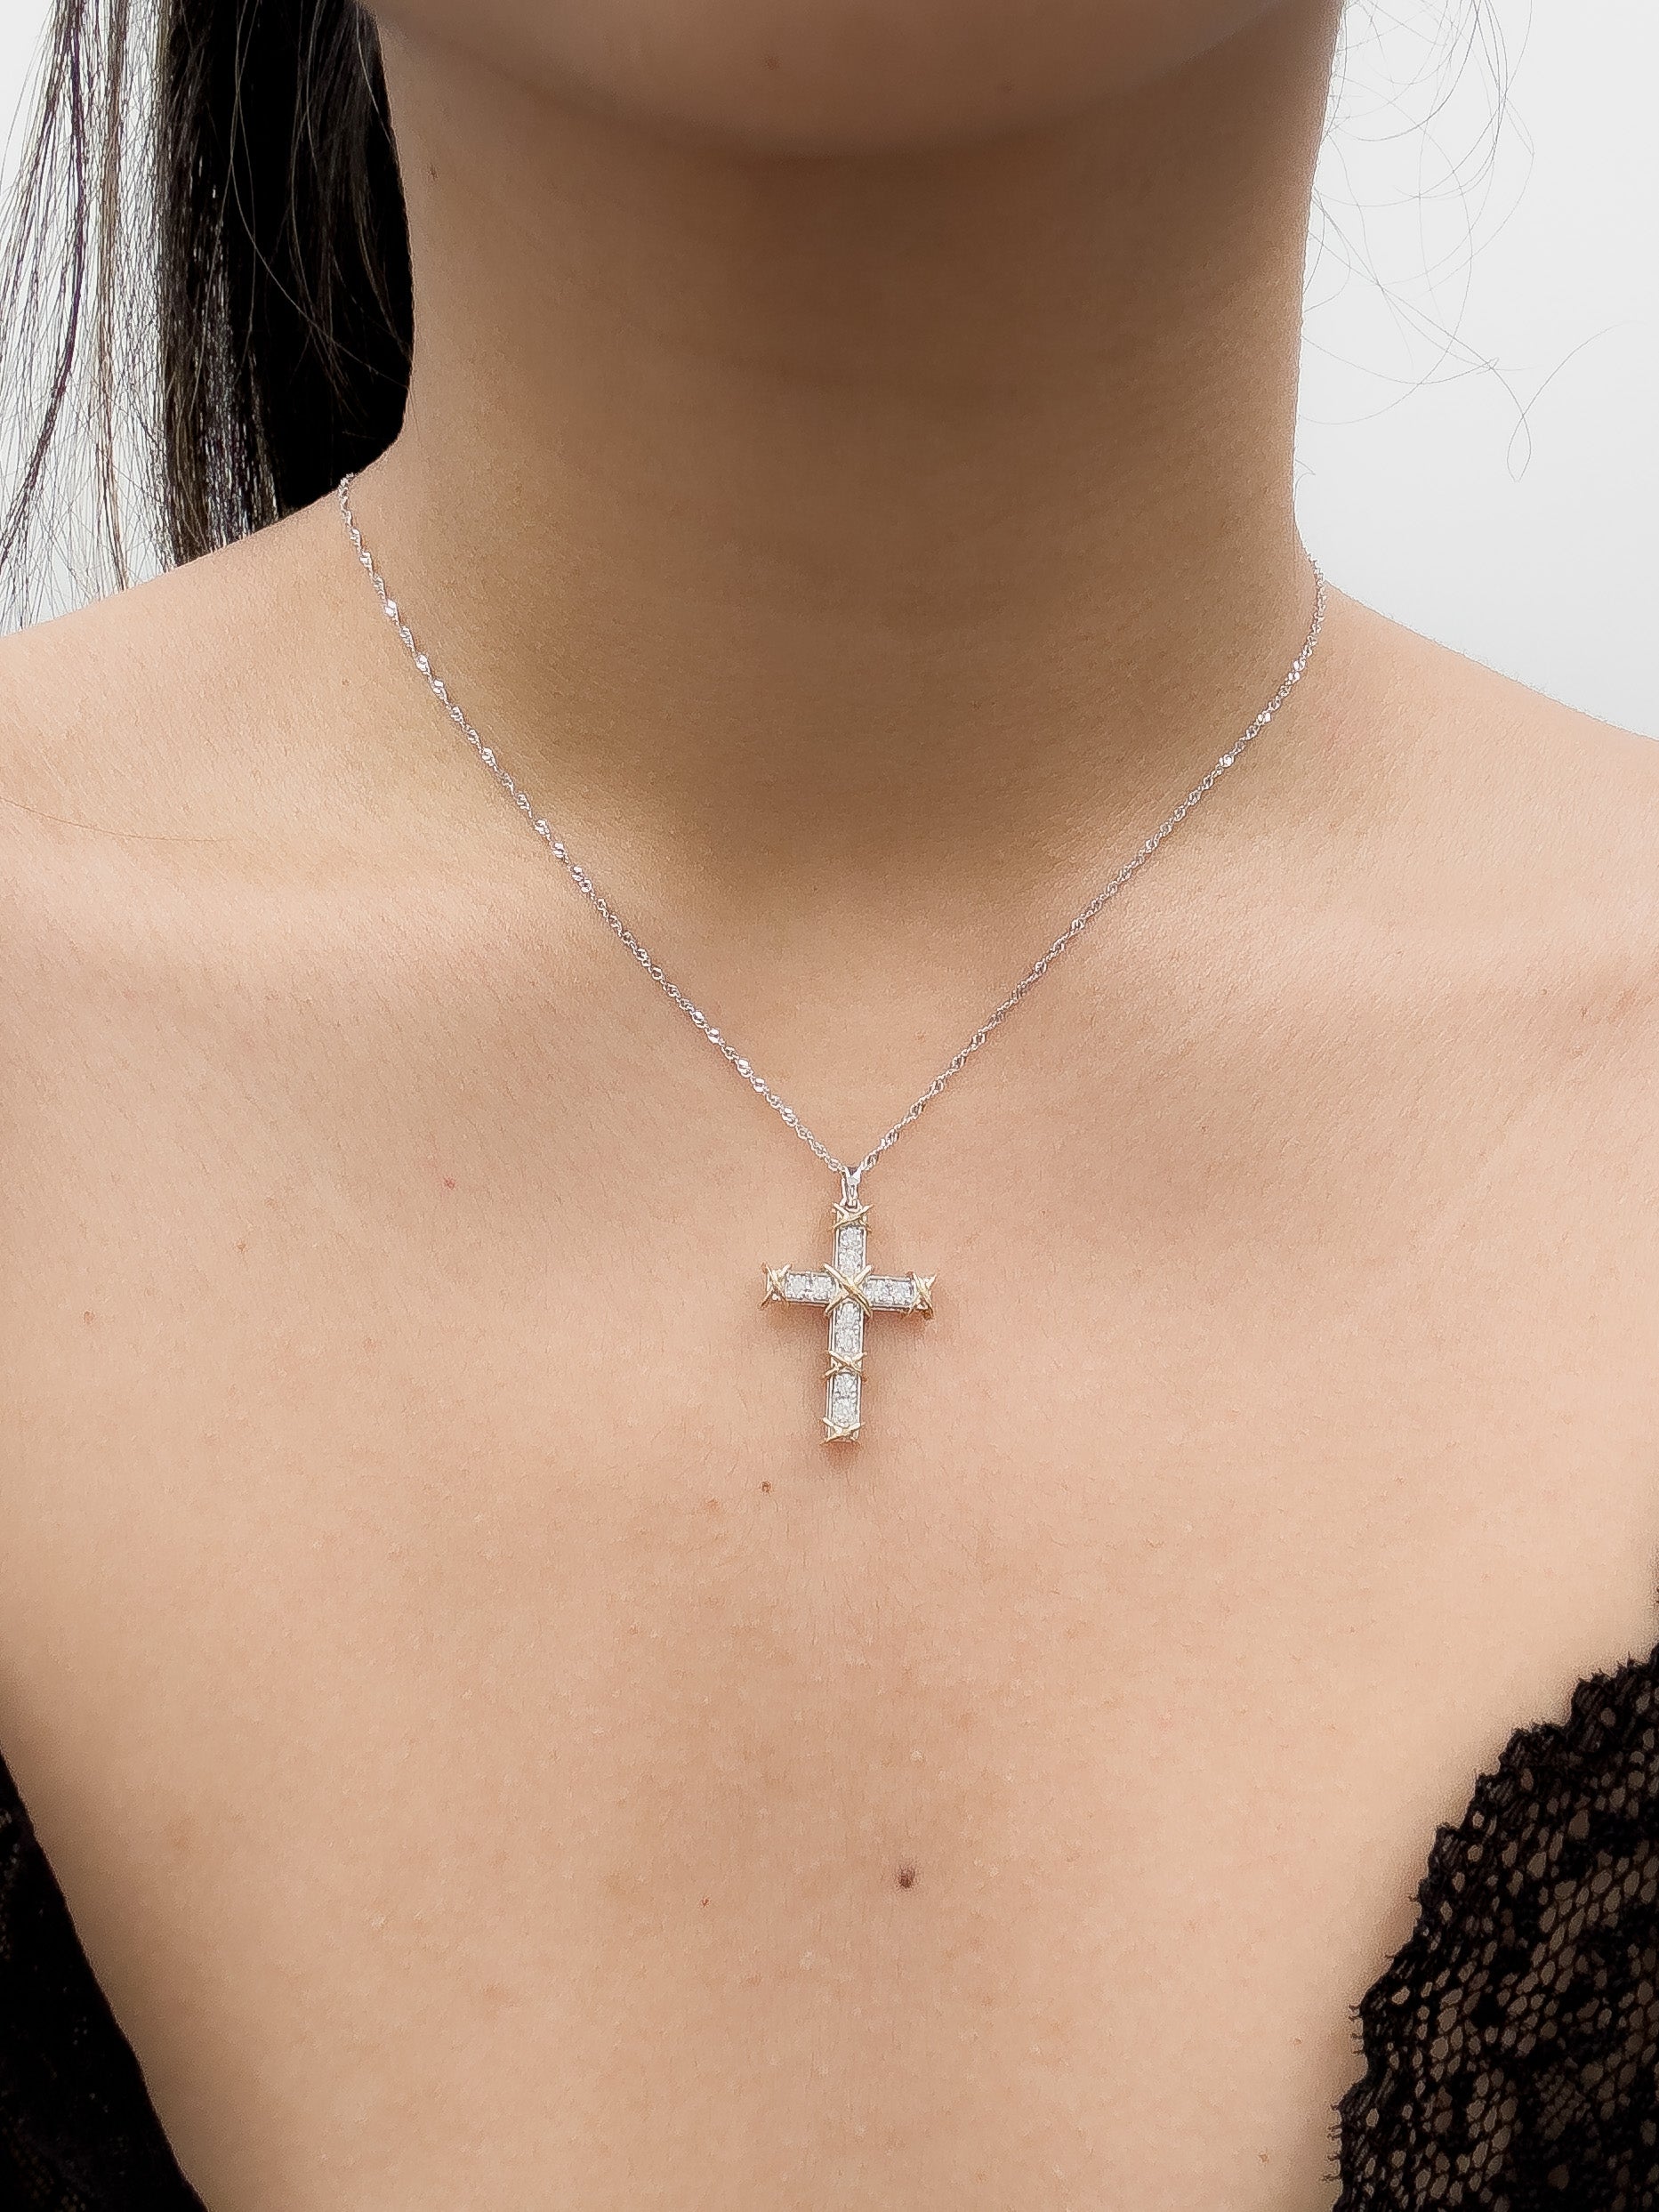 Cross Pendant with Wrap Design Two Tone Sterling Silver and Gold-plate –  AzureBella Jewelry